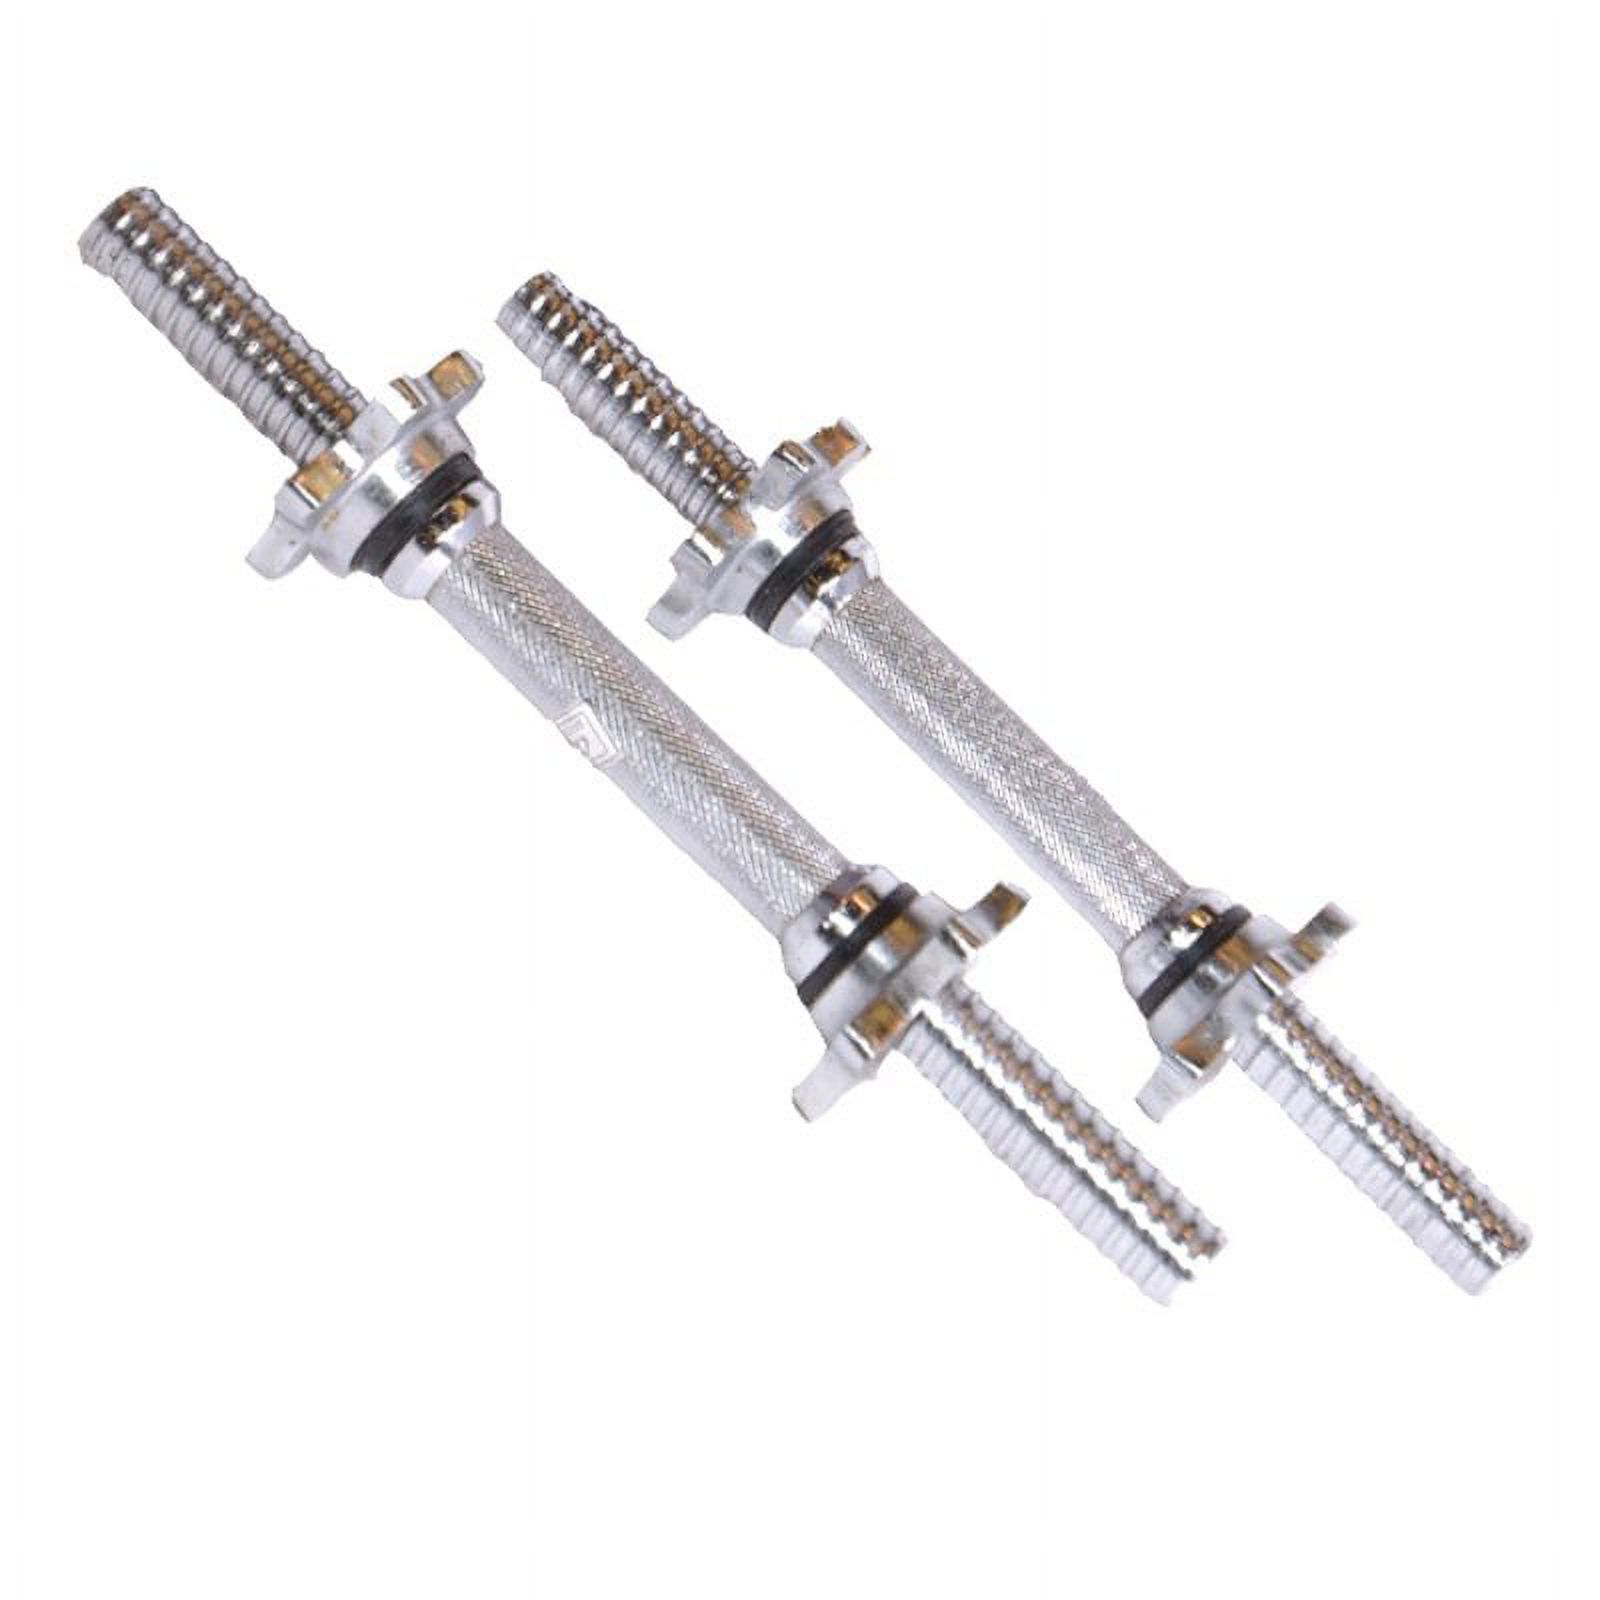 Online Gym Shops  Standard Dumbbell Handles with Threaded Ends - image 1 of 2